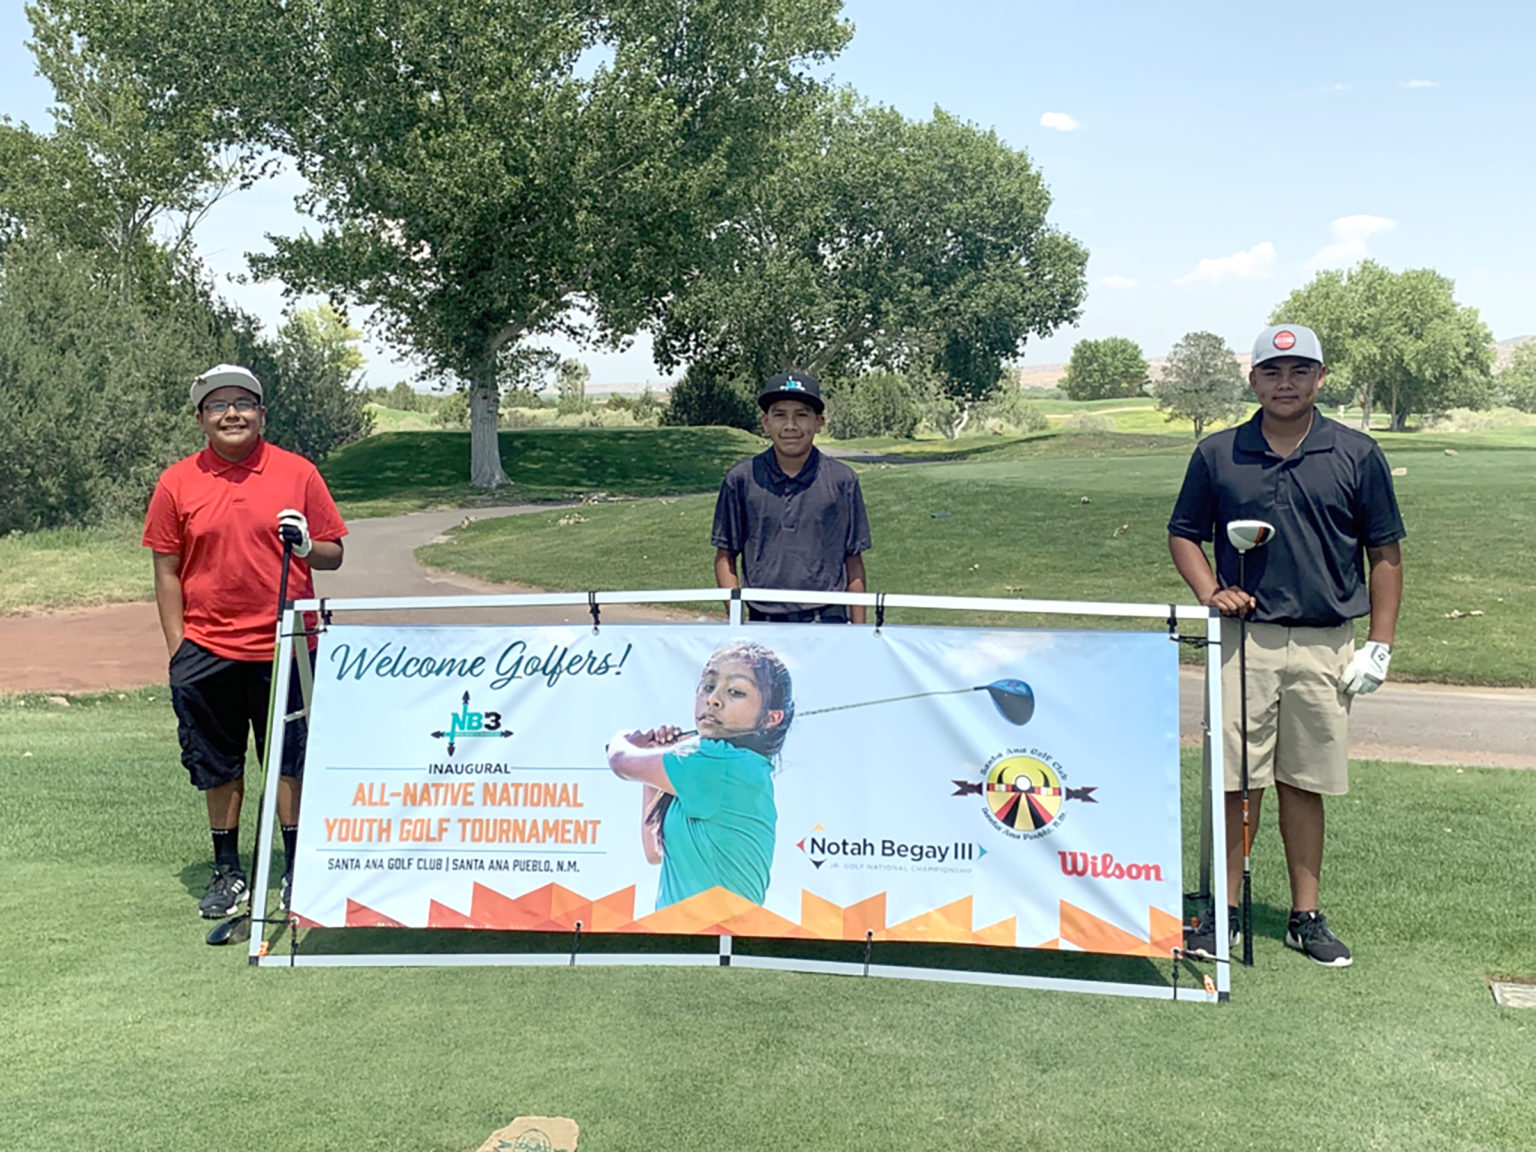 NB3 Foundation holds allNative youth golf tournament • The Seminole